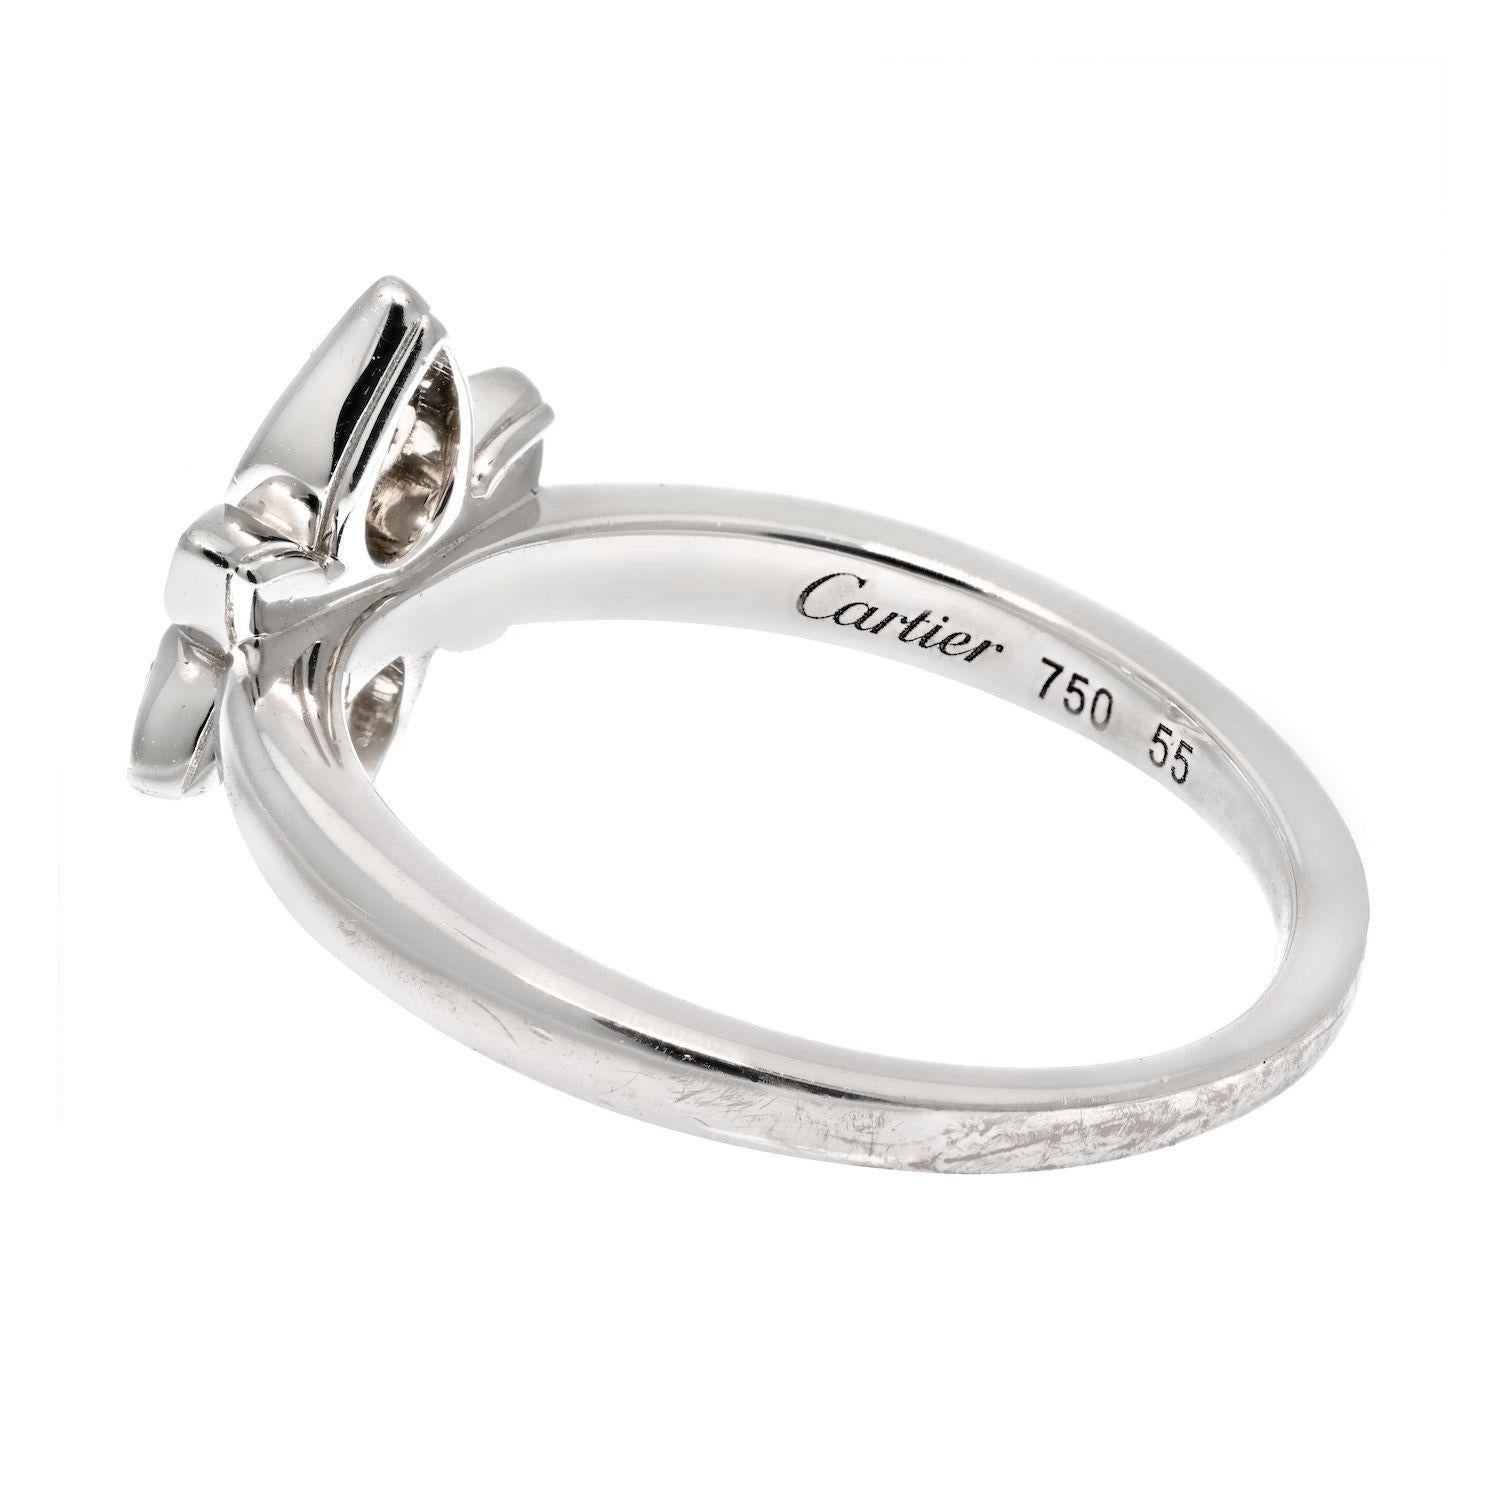  This Petite floral diamond ring by Cartier in 18 white gold is a timeless piece that makes a great gift for any occasion. It has a delicate design featuring center diamonds of about 0.46cttw. The shimmering diamonds create a beautiful and romantic